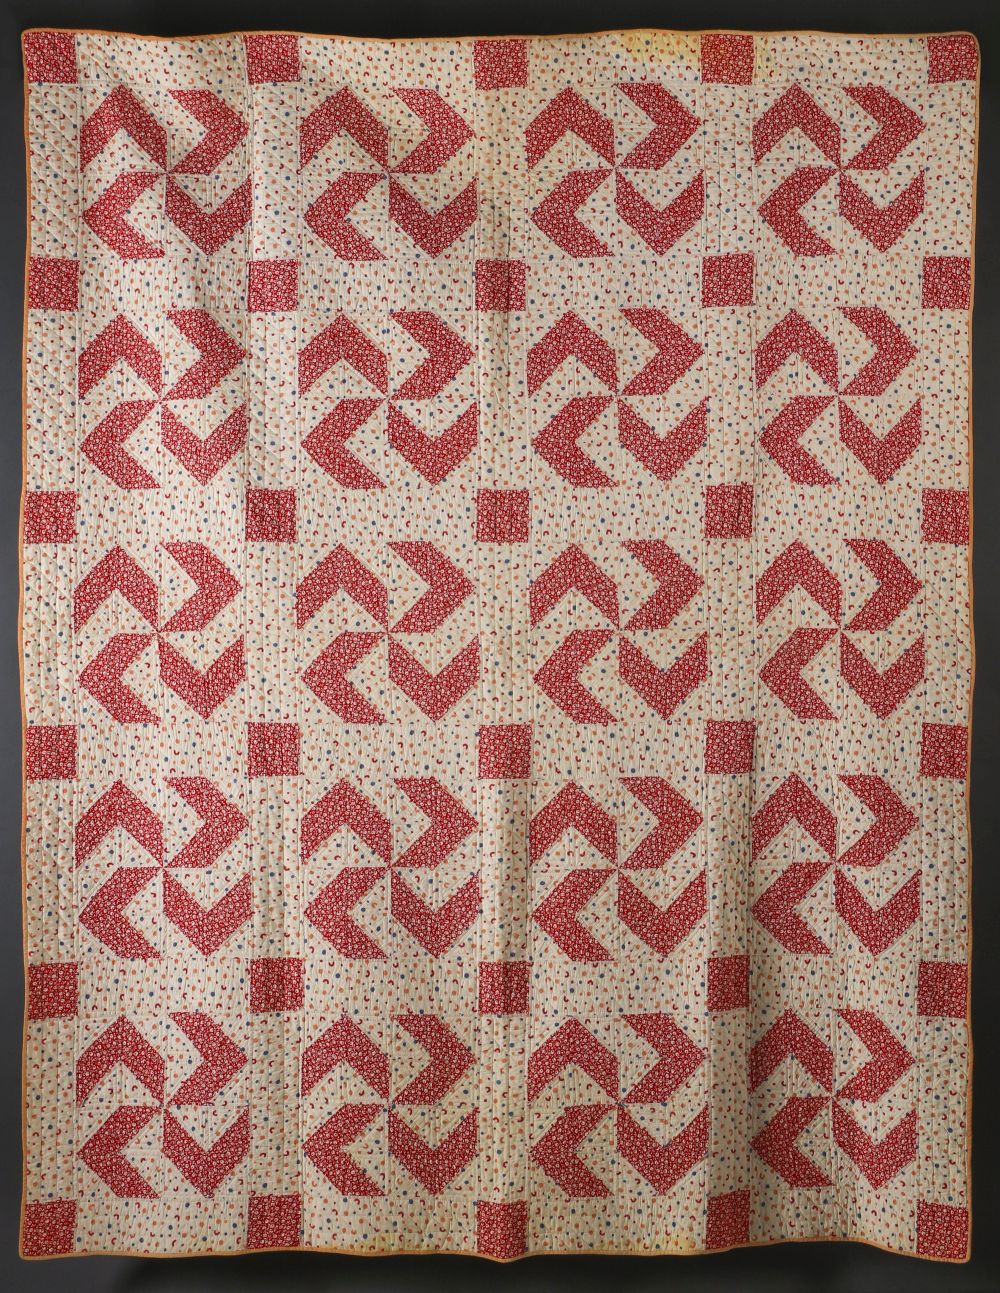 A VINTAGE 'FLY FOOT' PATTERN QUILT